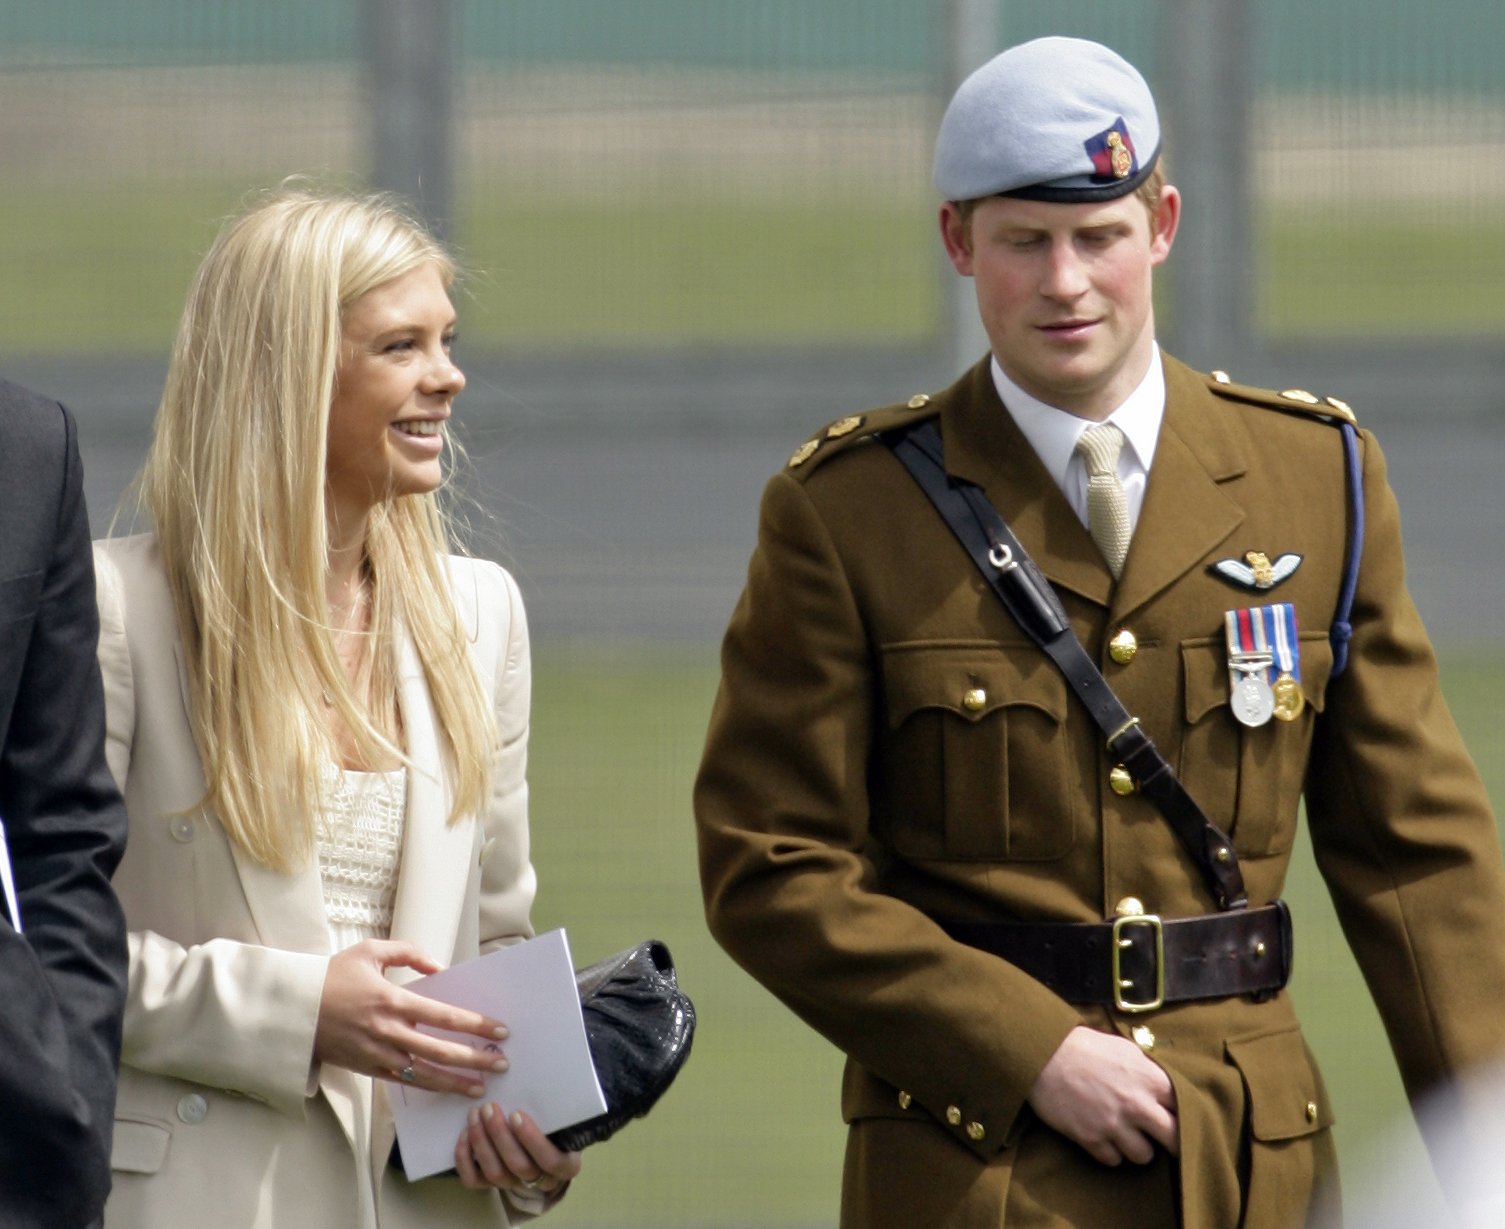 Chelsy and Harry walking together after he received his flying badges. | Source: Getty Images